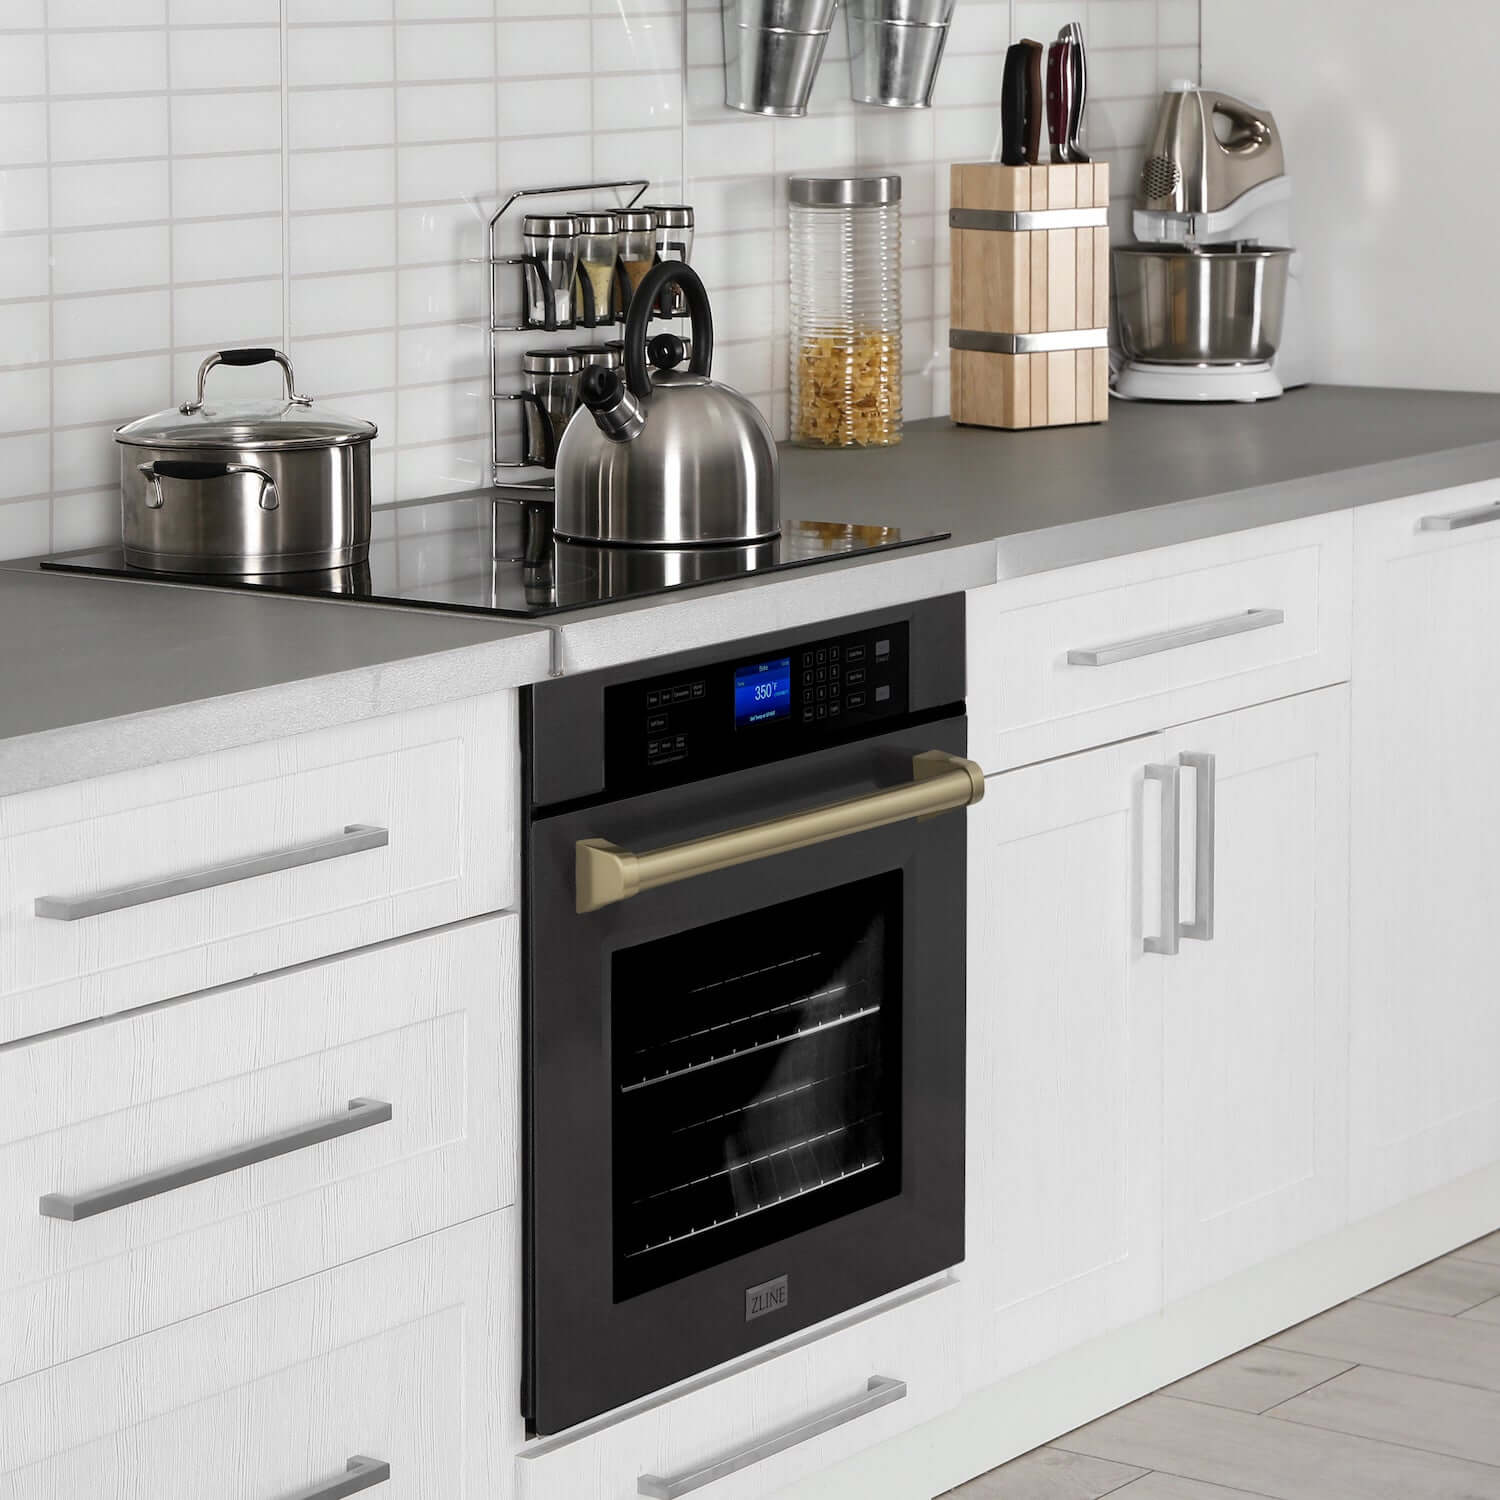 ZLINE Autograph Edition Black Stainless Steel wall oven built-in to kitchen cabinets in a farmhouse-style kitchen.